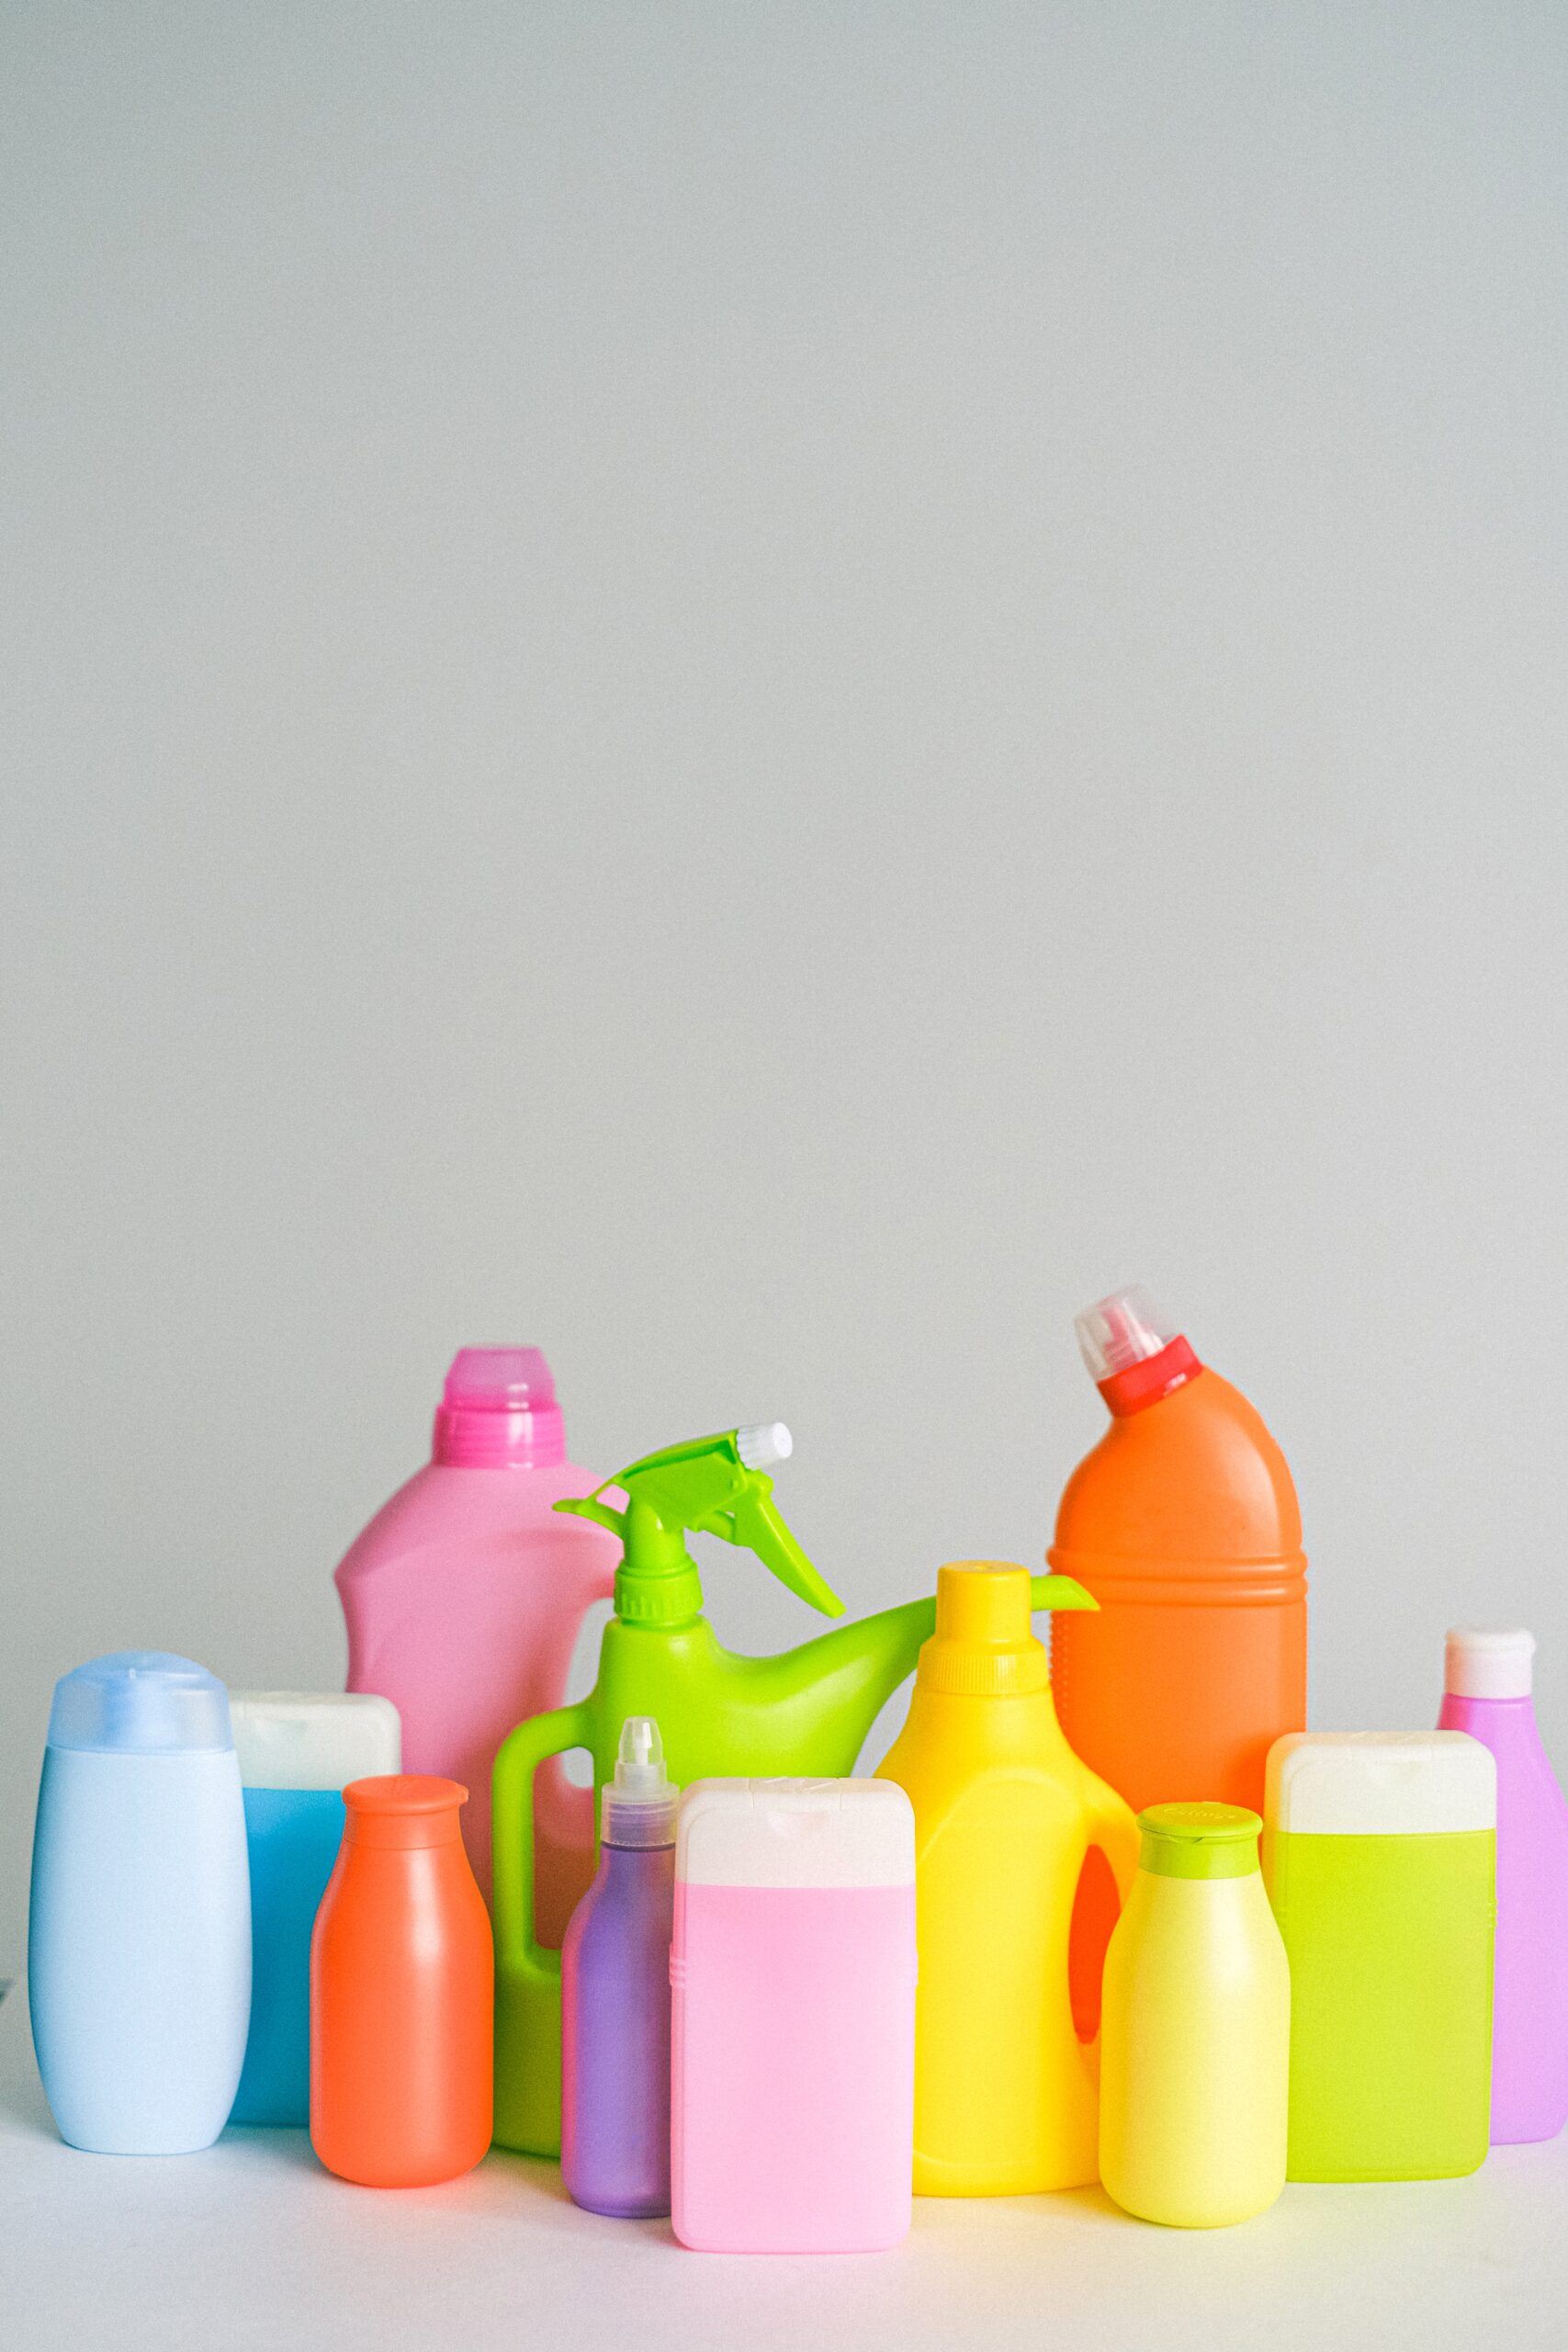 Cleaning products to help you with spring cleaning